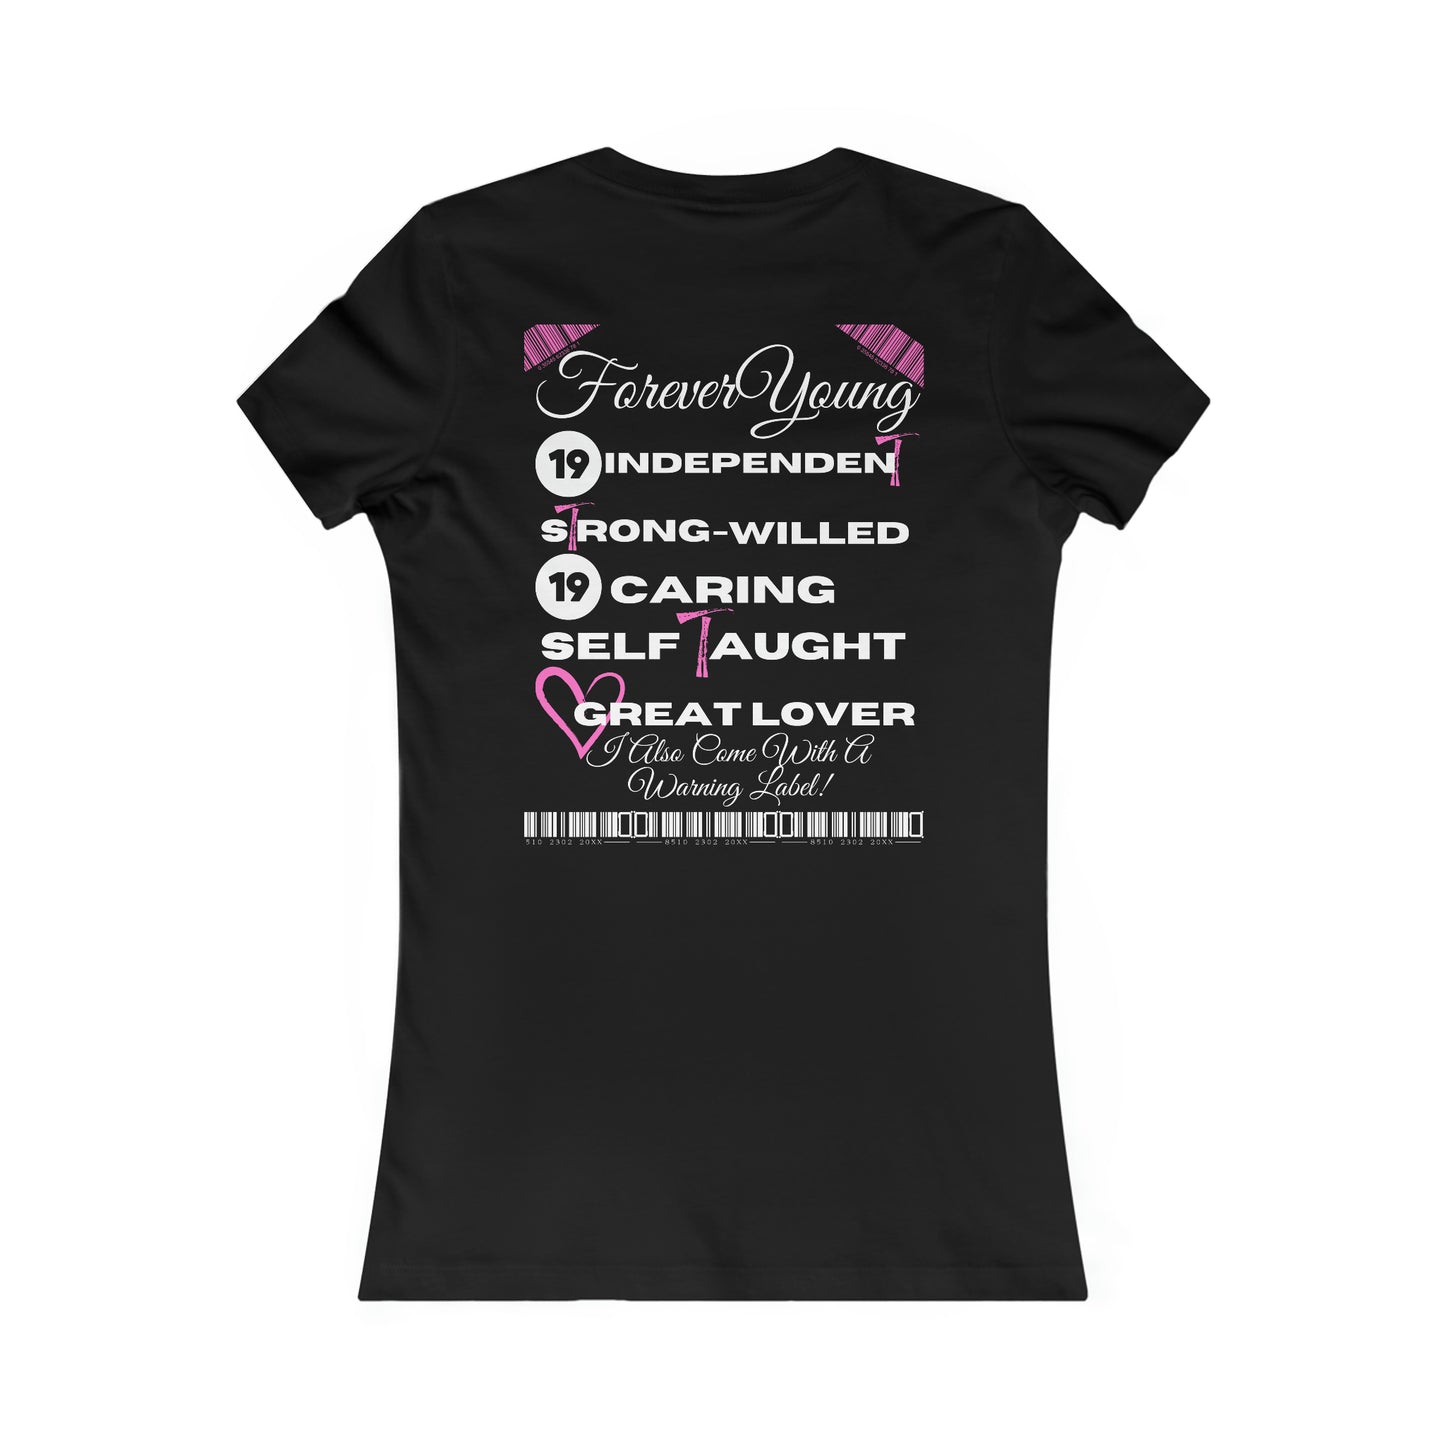 Young Forever Self-Empowering Women's Bella Shirt (NighteenCoSpecialEdition)